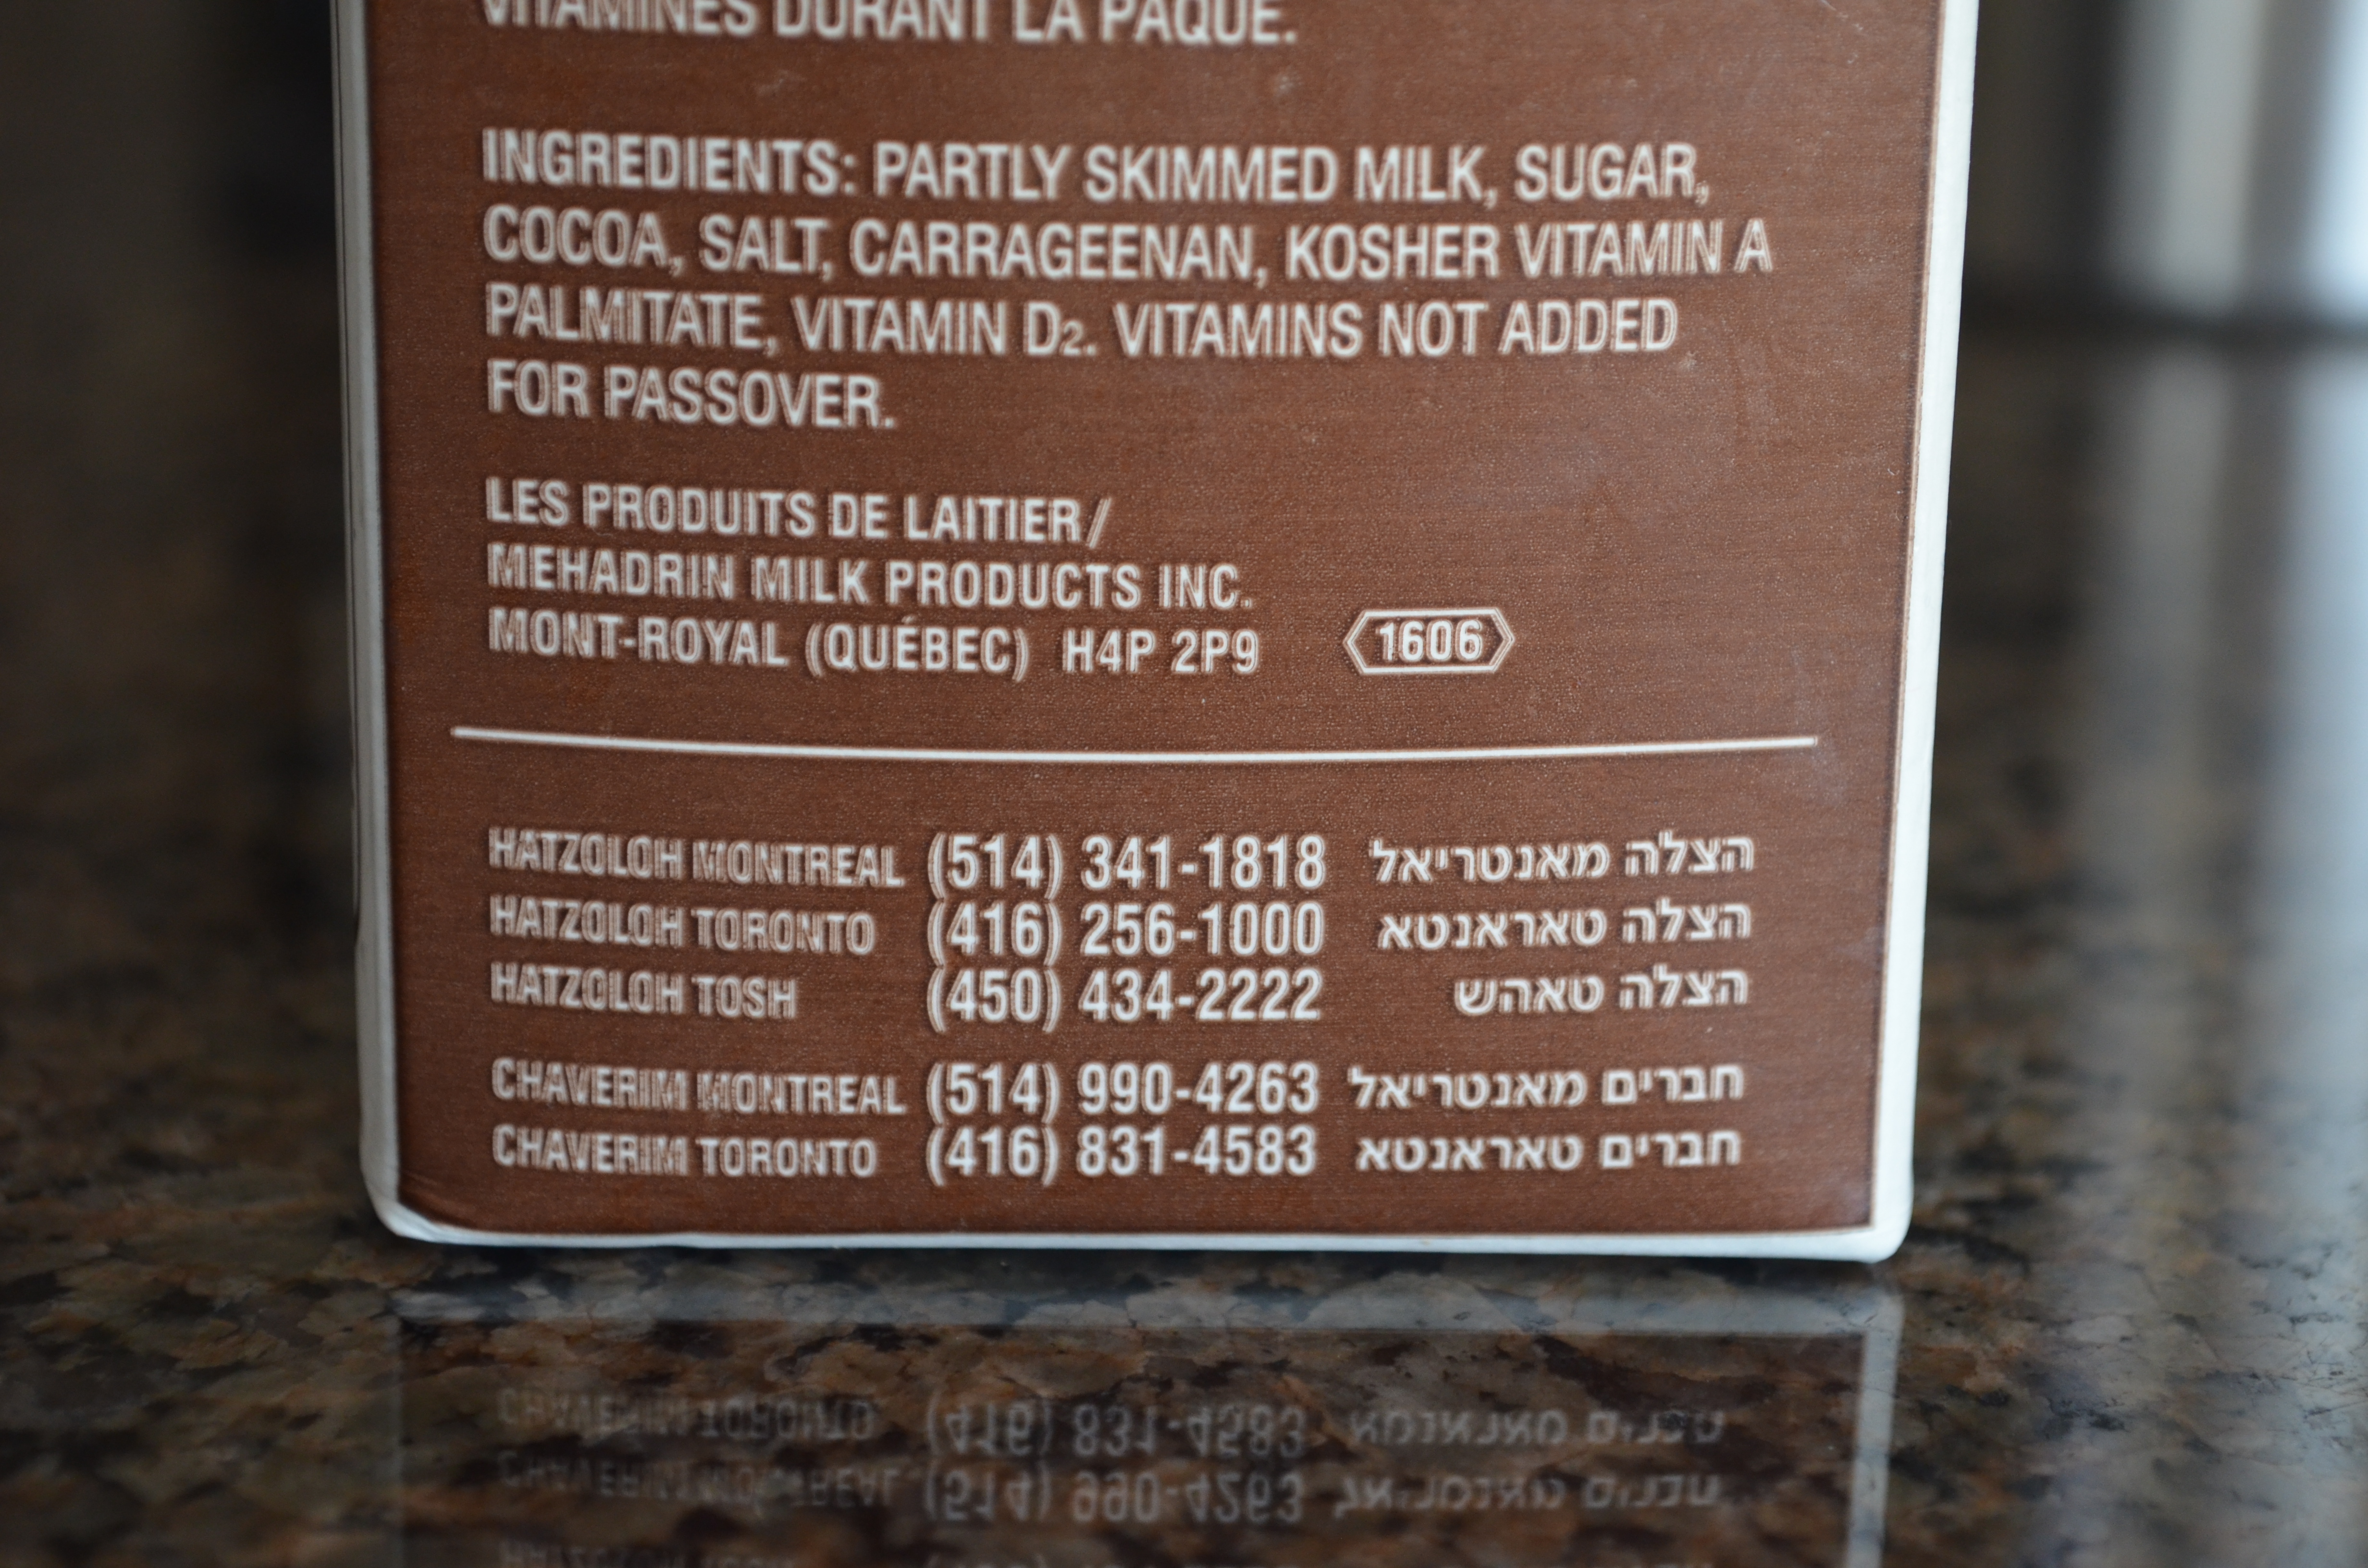 avoiding artificial food dyes: “healthy” chocolate milk | chemical-free, dye-free convenient alternative